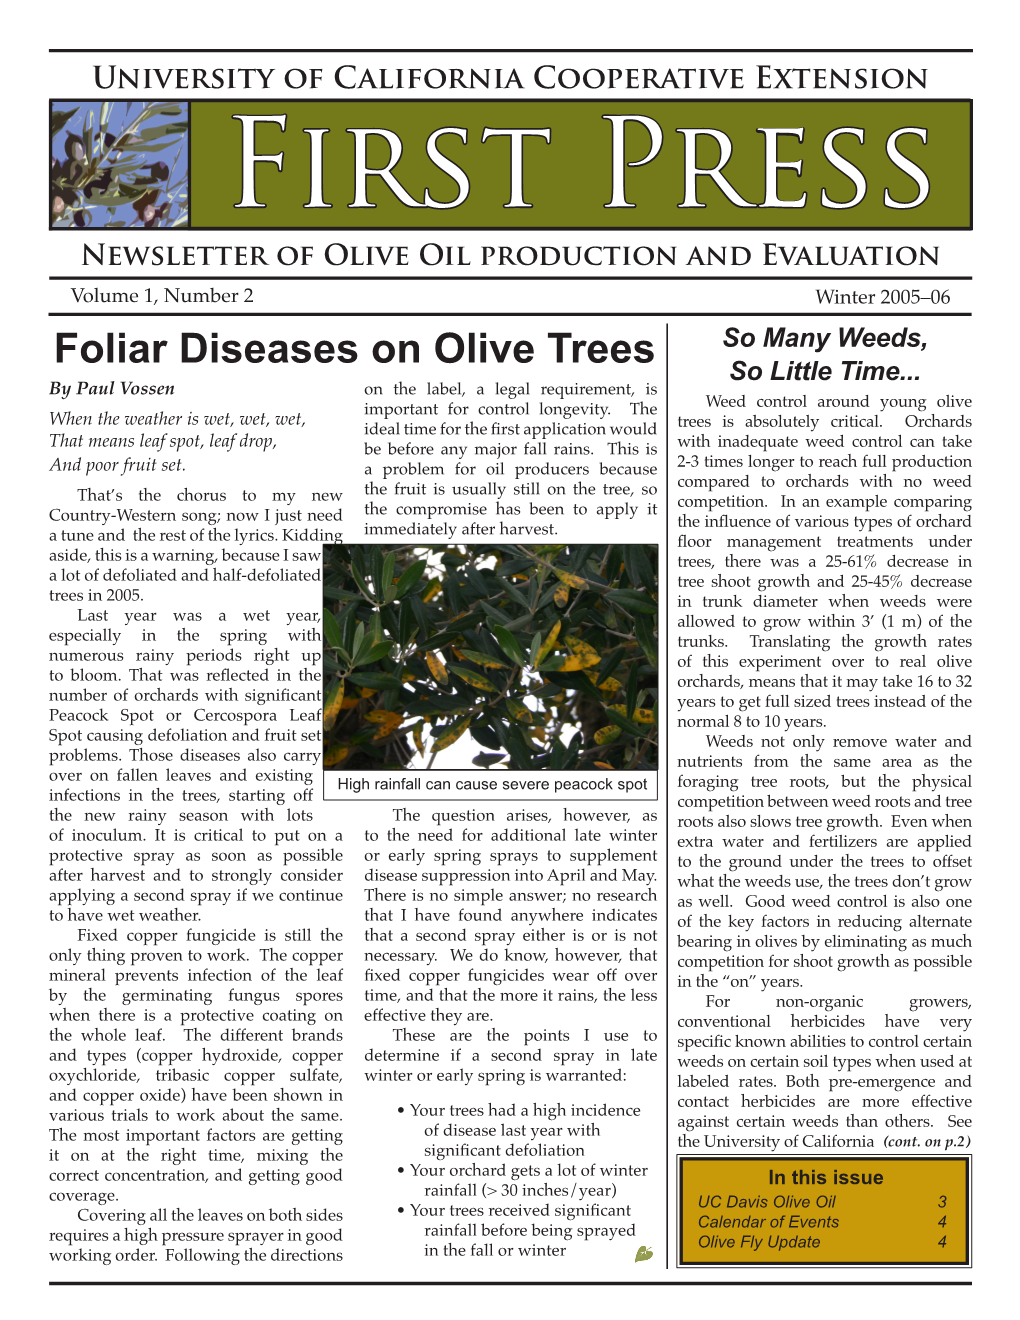 Foliar Diseases on Olive Trees So Many Weeds, So Little Time